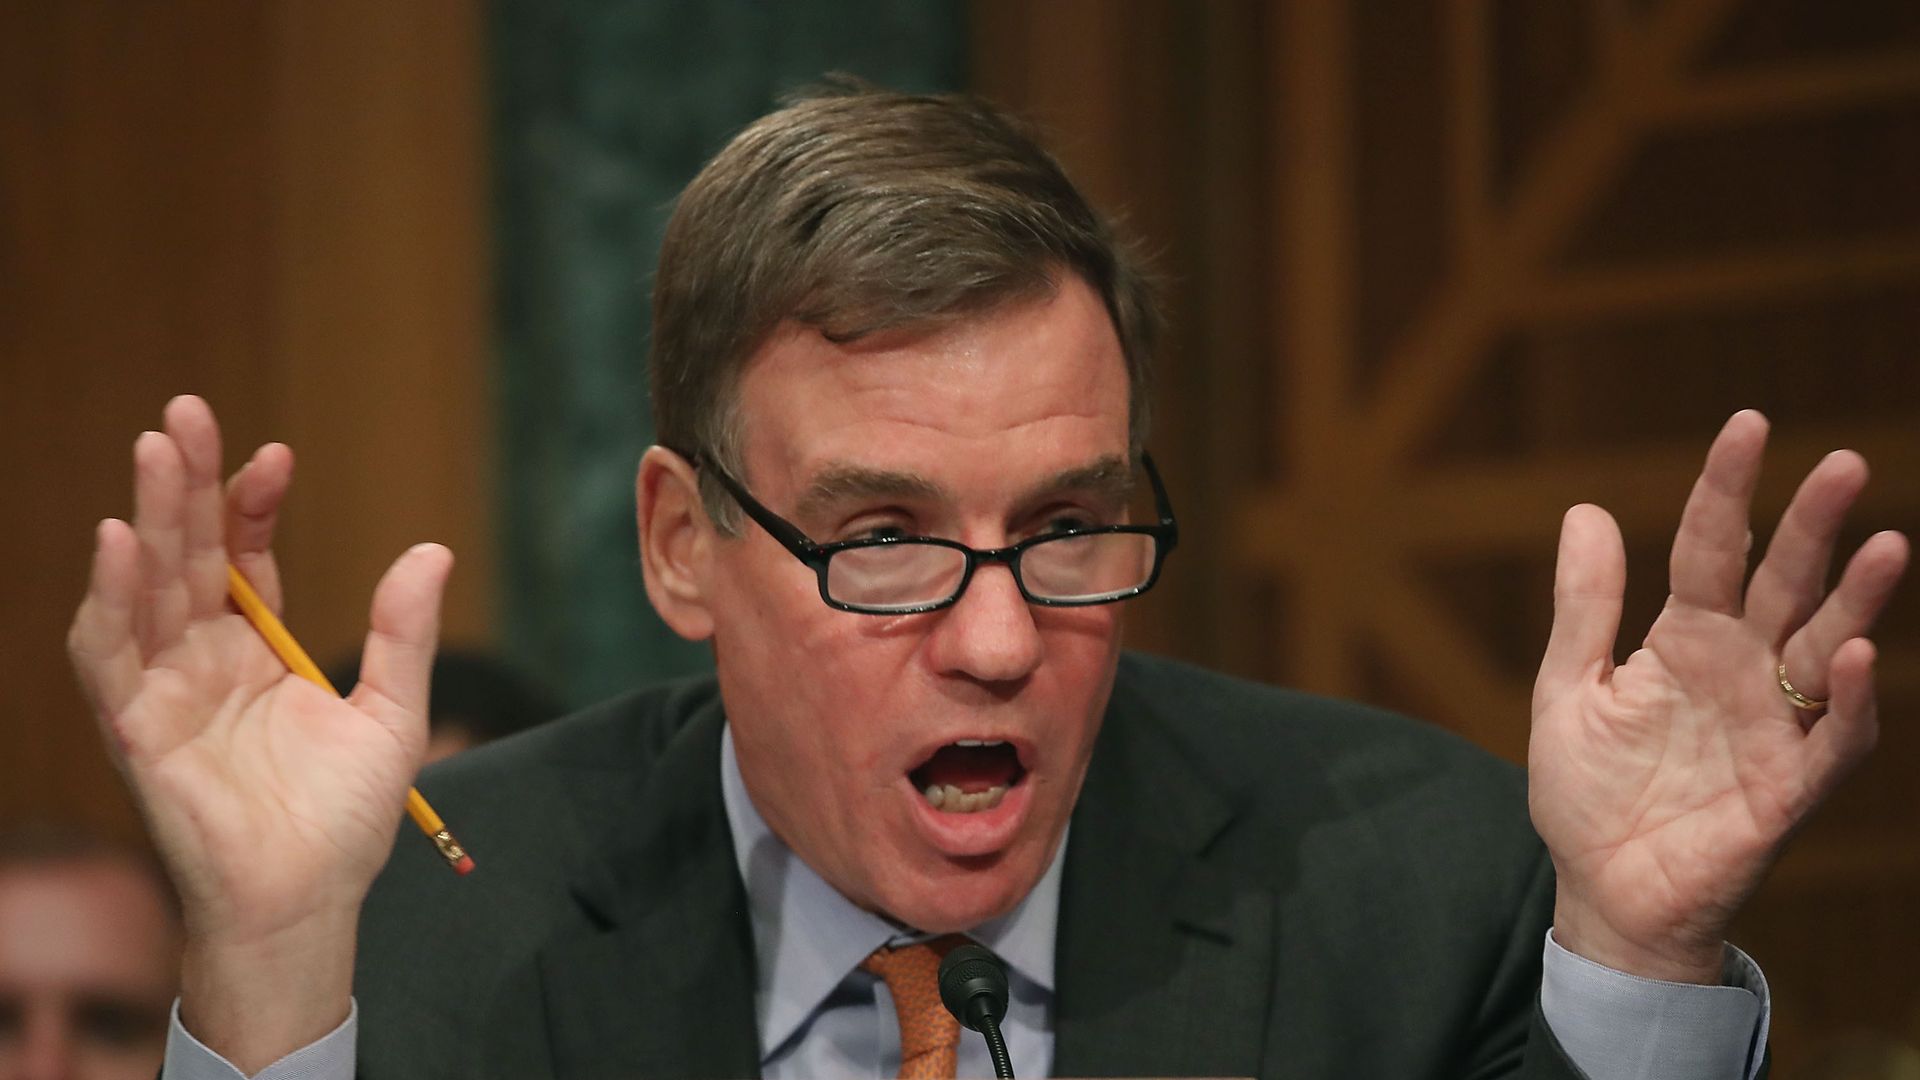 Mark Warner talks with hands up looking over glasses